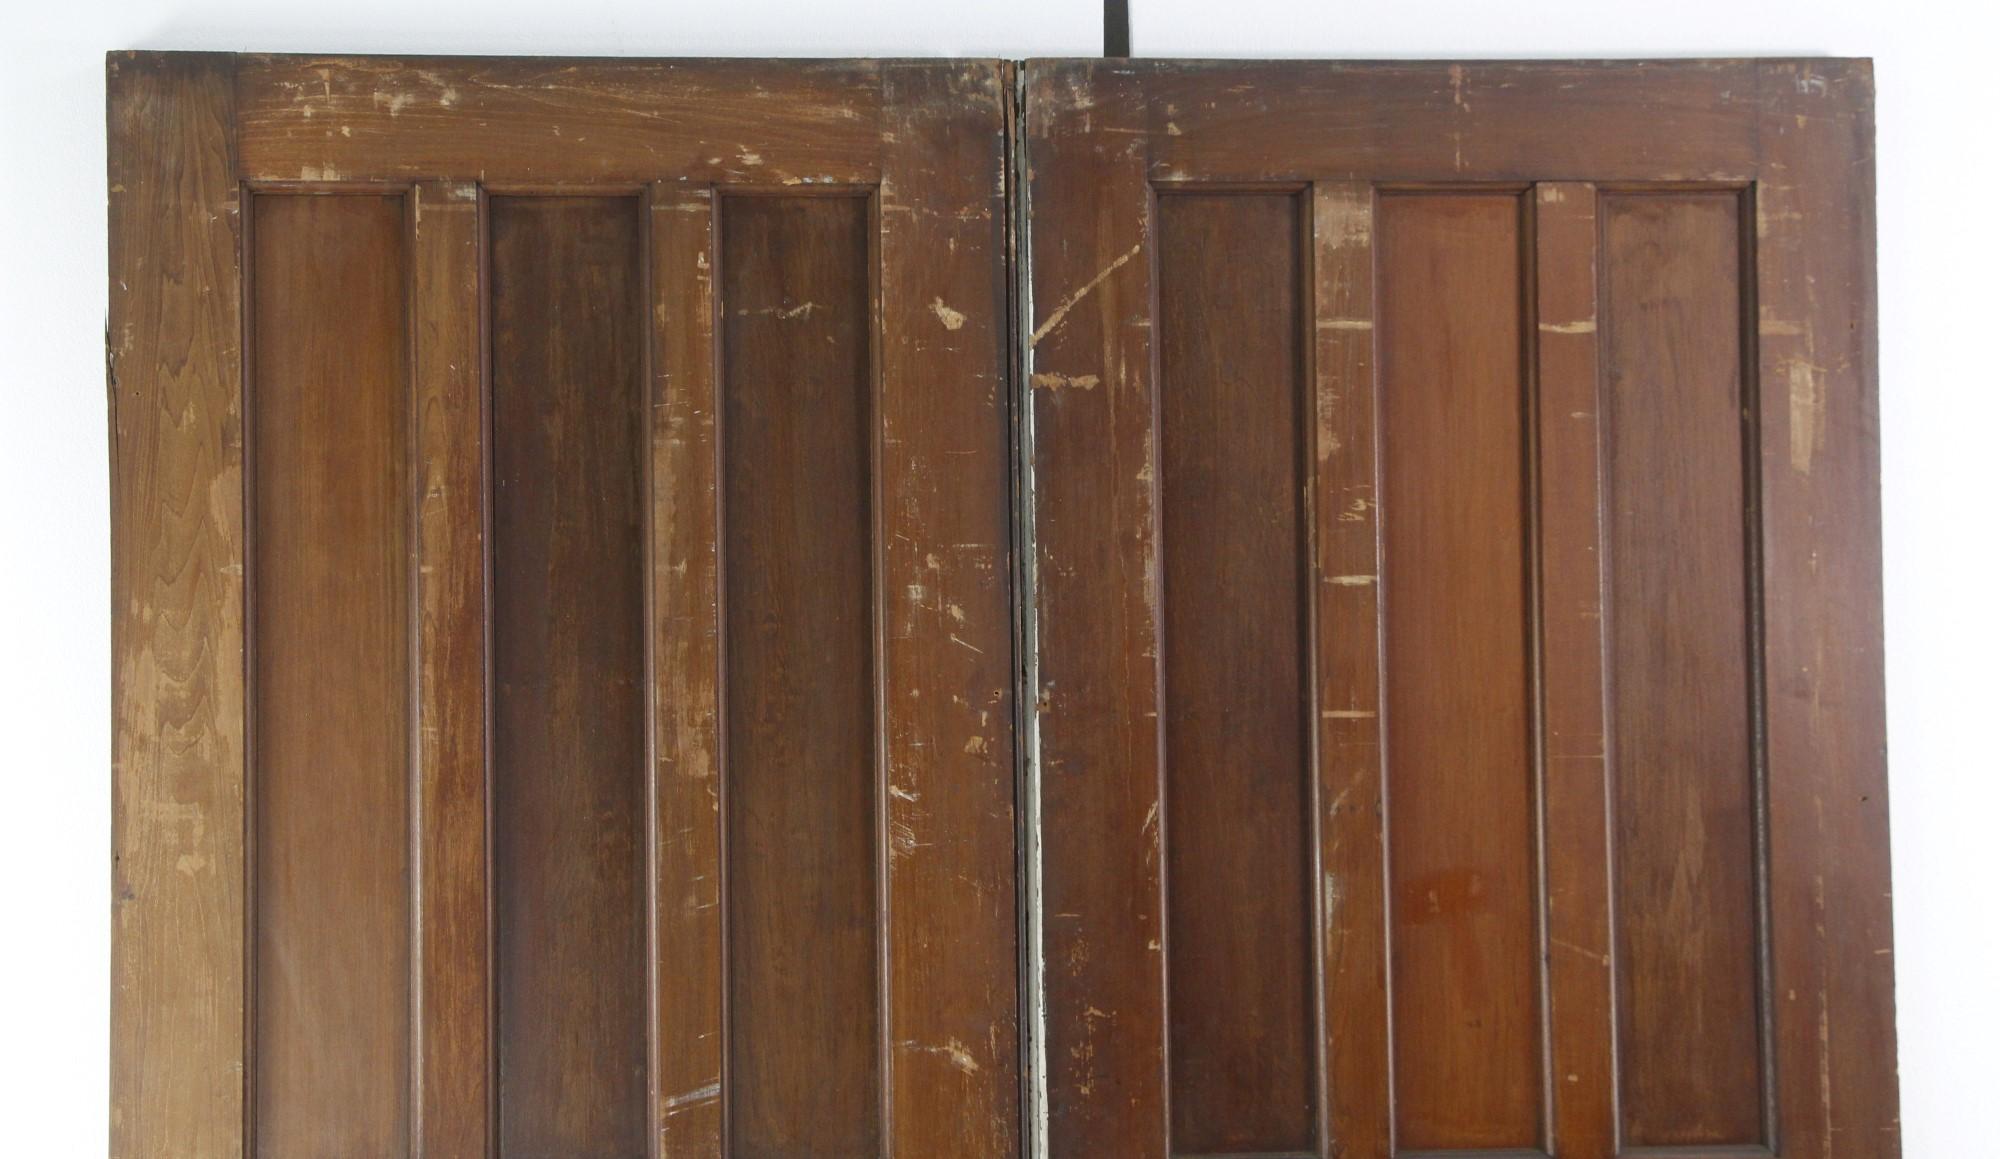 This set of dark tone pine pocket doors are original to the early 1900's have a natural distressed look. Each door of this set has seven panes and measures 32